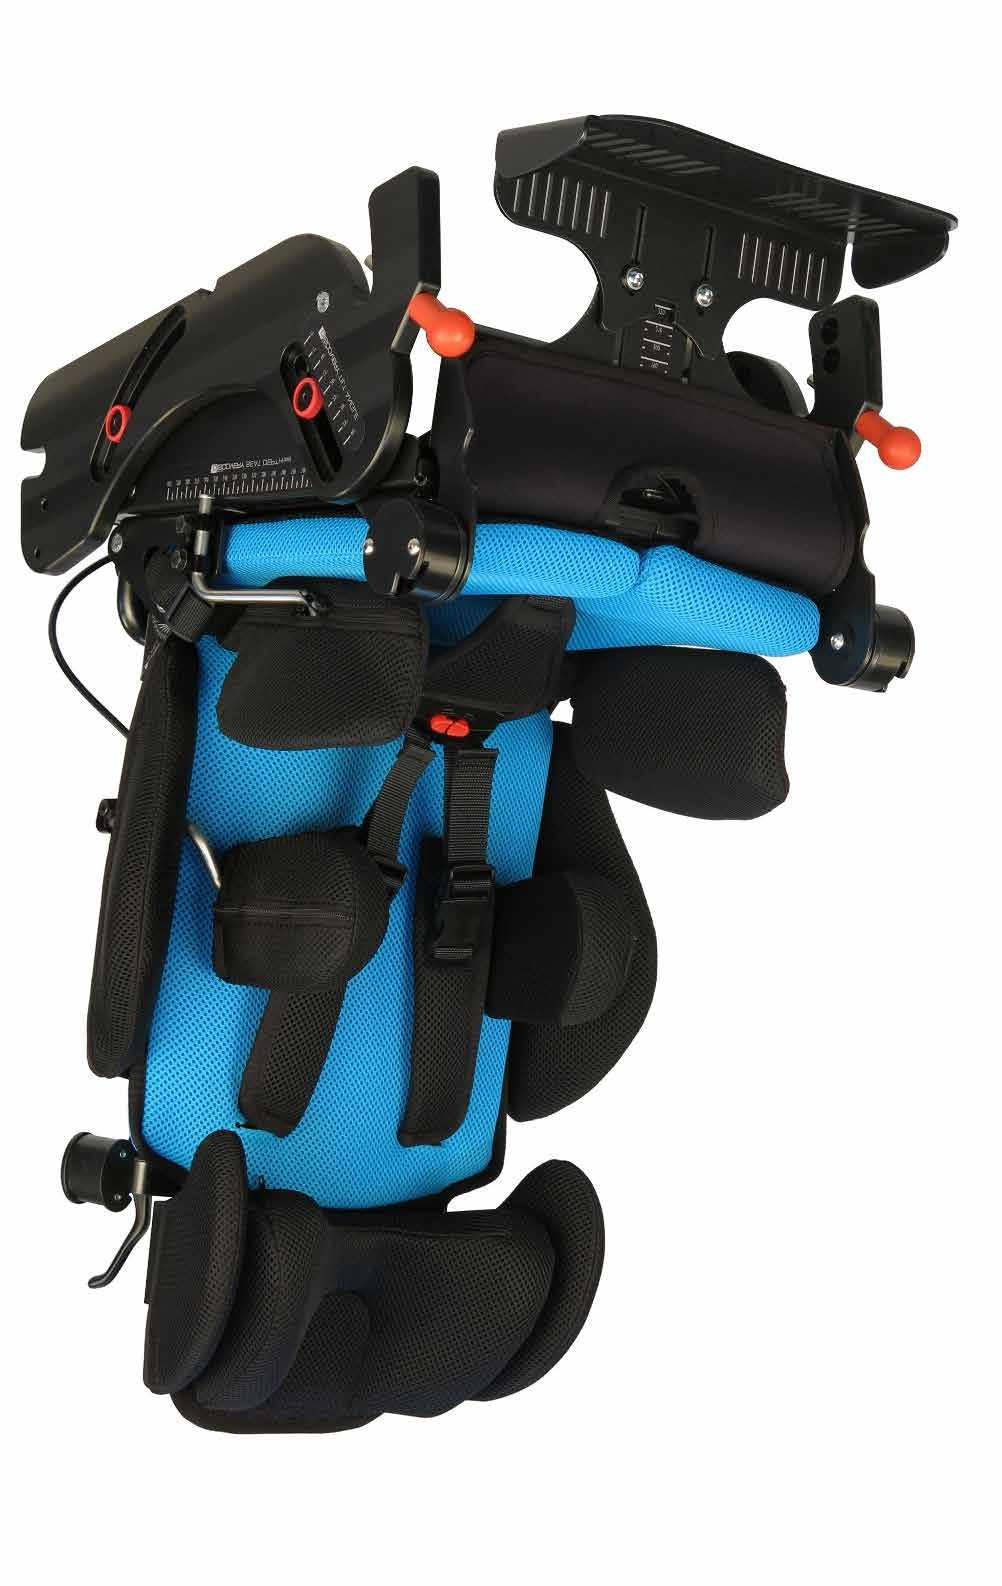 ssembling the Discovery Seat 12 11 10 9 1 2 3 4 5 6 7 8 1. Occipital support headrest pad 2. Padded shoulder strap 3. Thoracic laterals 4. ackrest laterals 5.